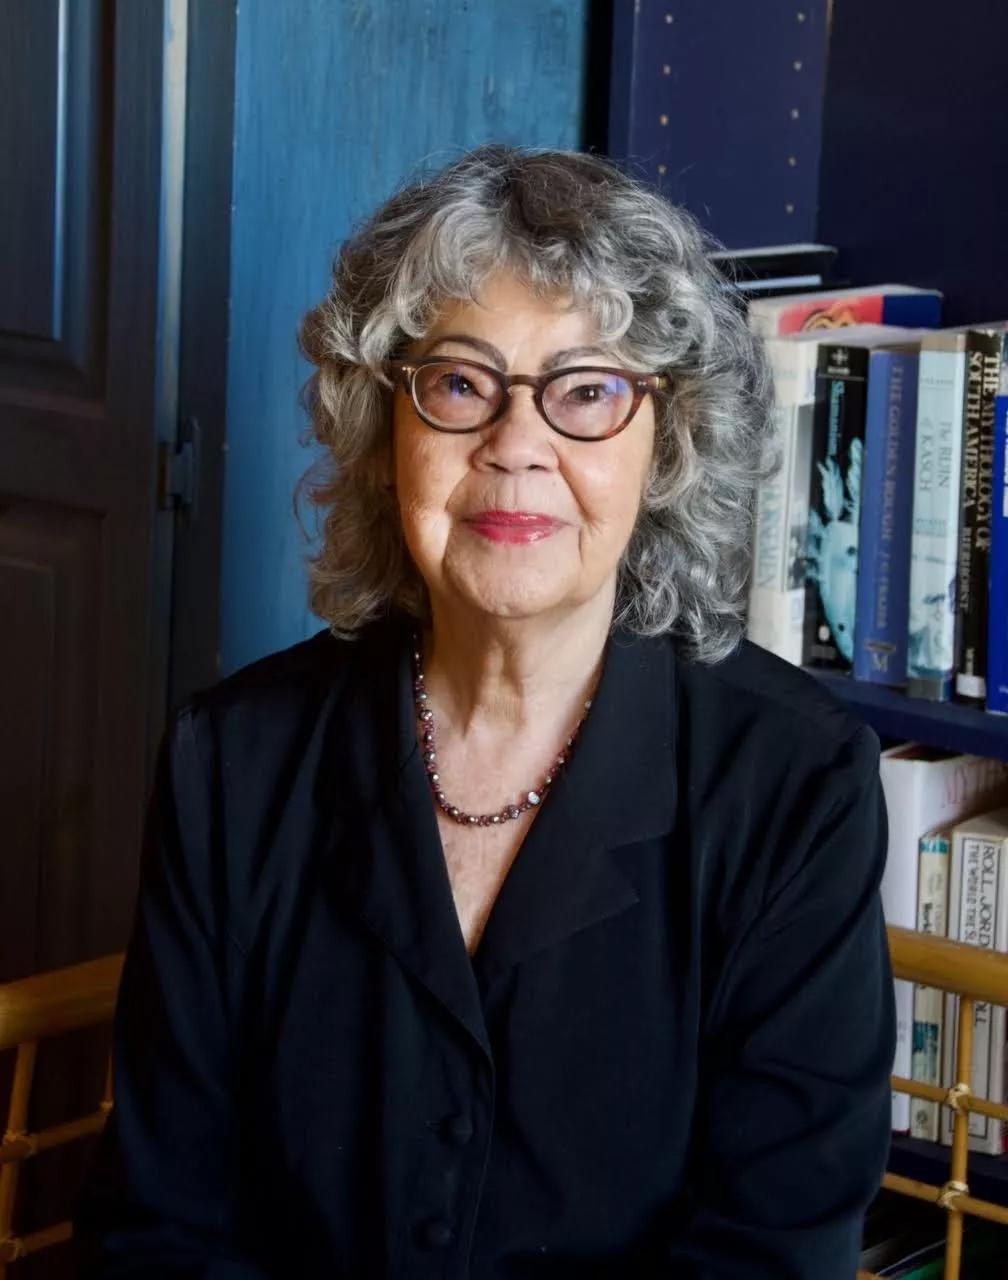 Poet Olive Senior sits in front of a bookshelf wearing glasses and a black top